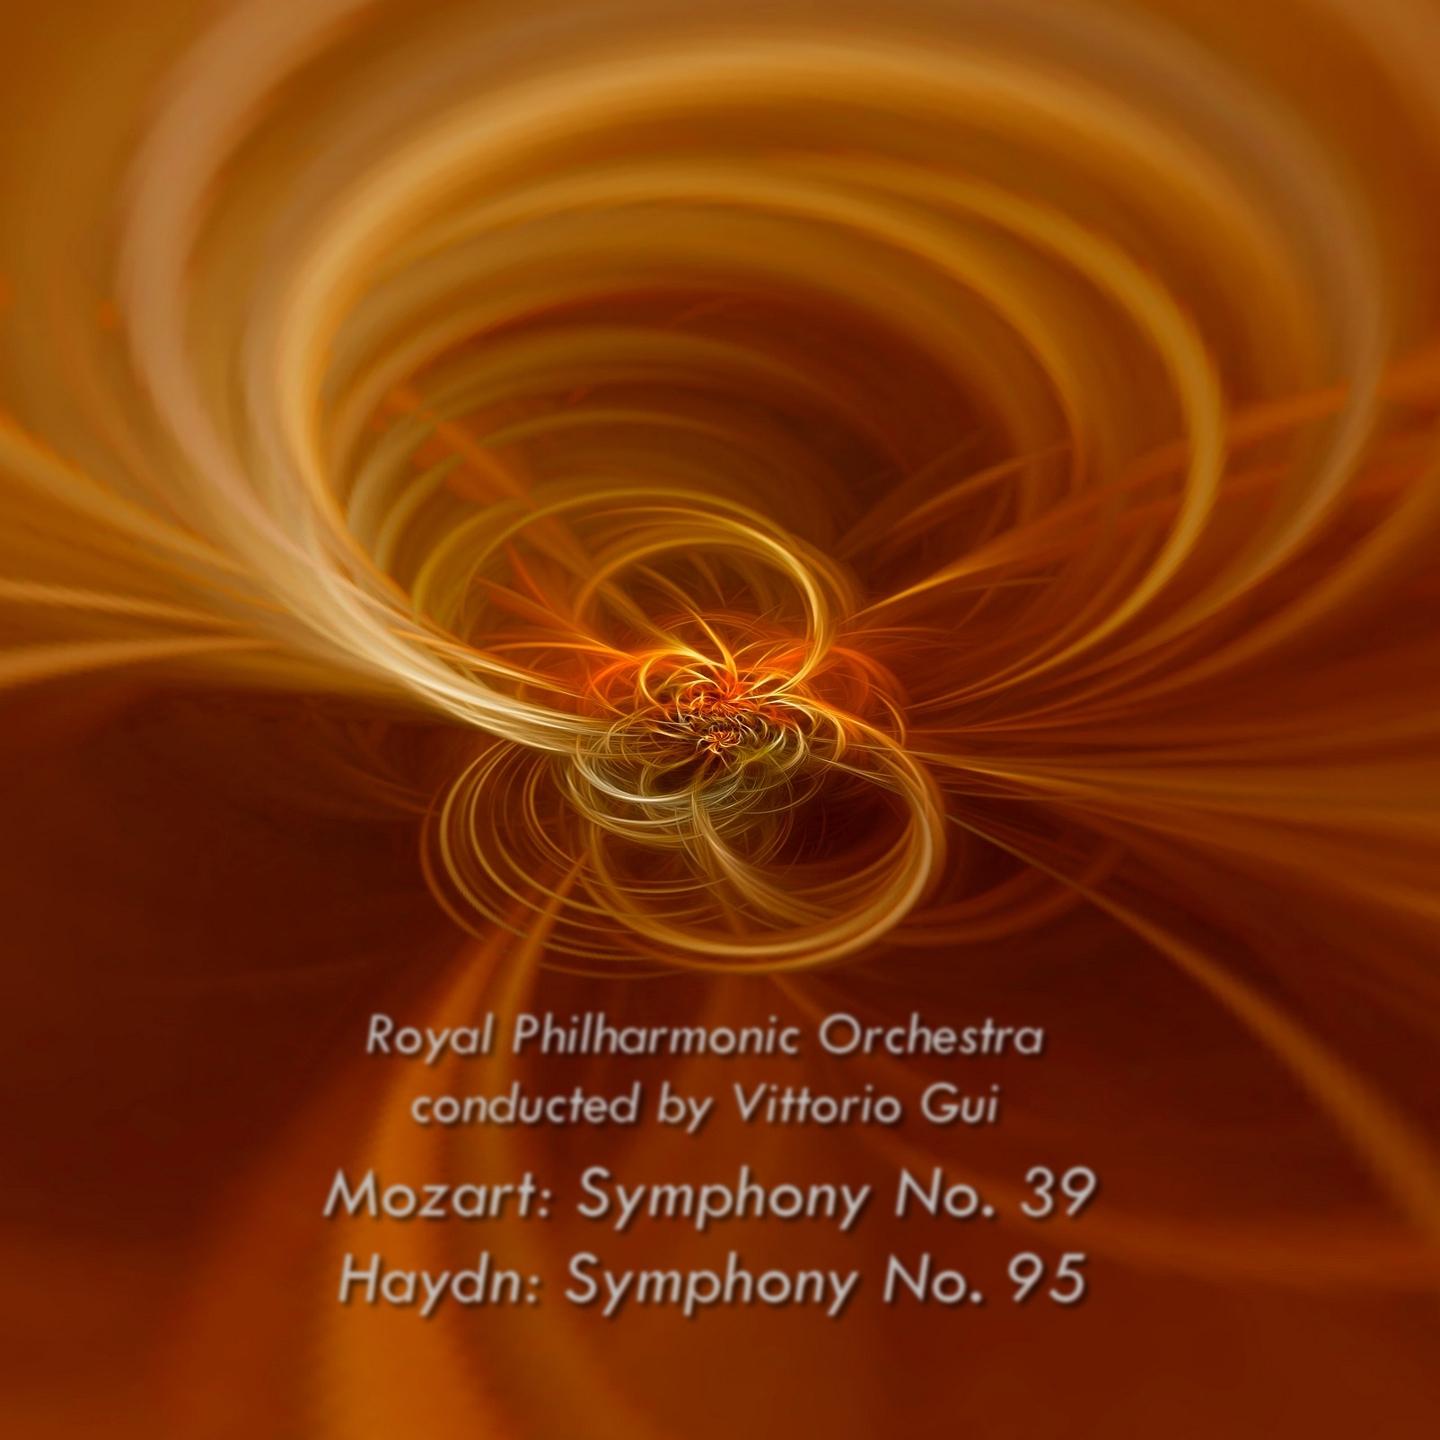 Symphony No 95 in C Minor, Op. 2nd mvt. - Andante cantabile